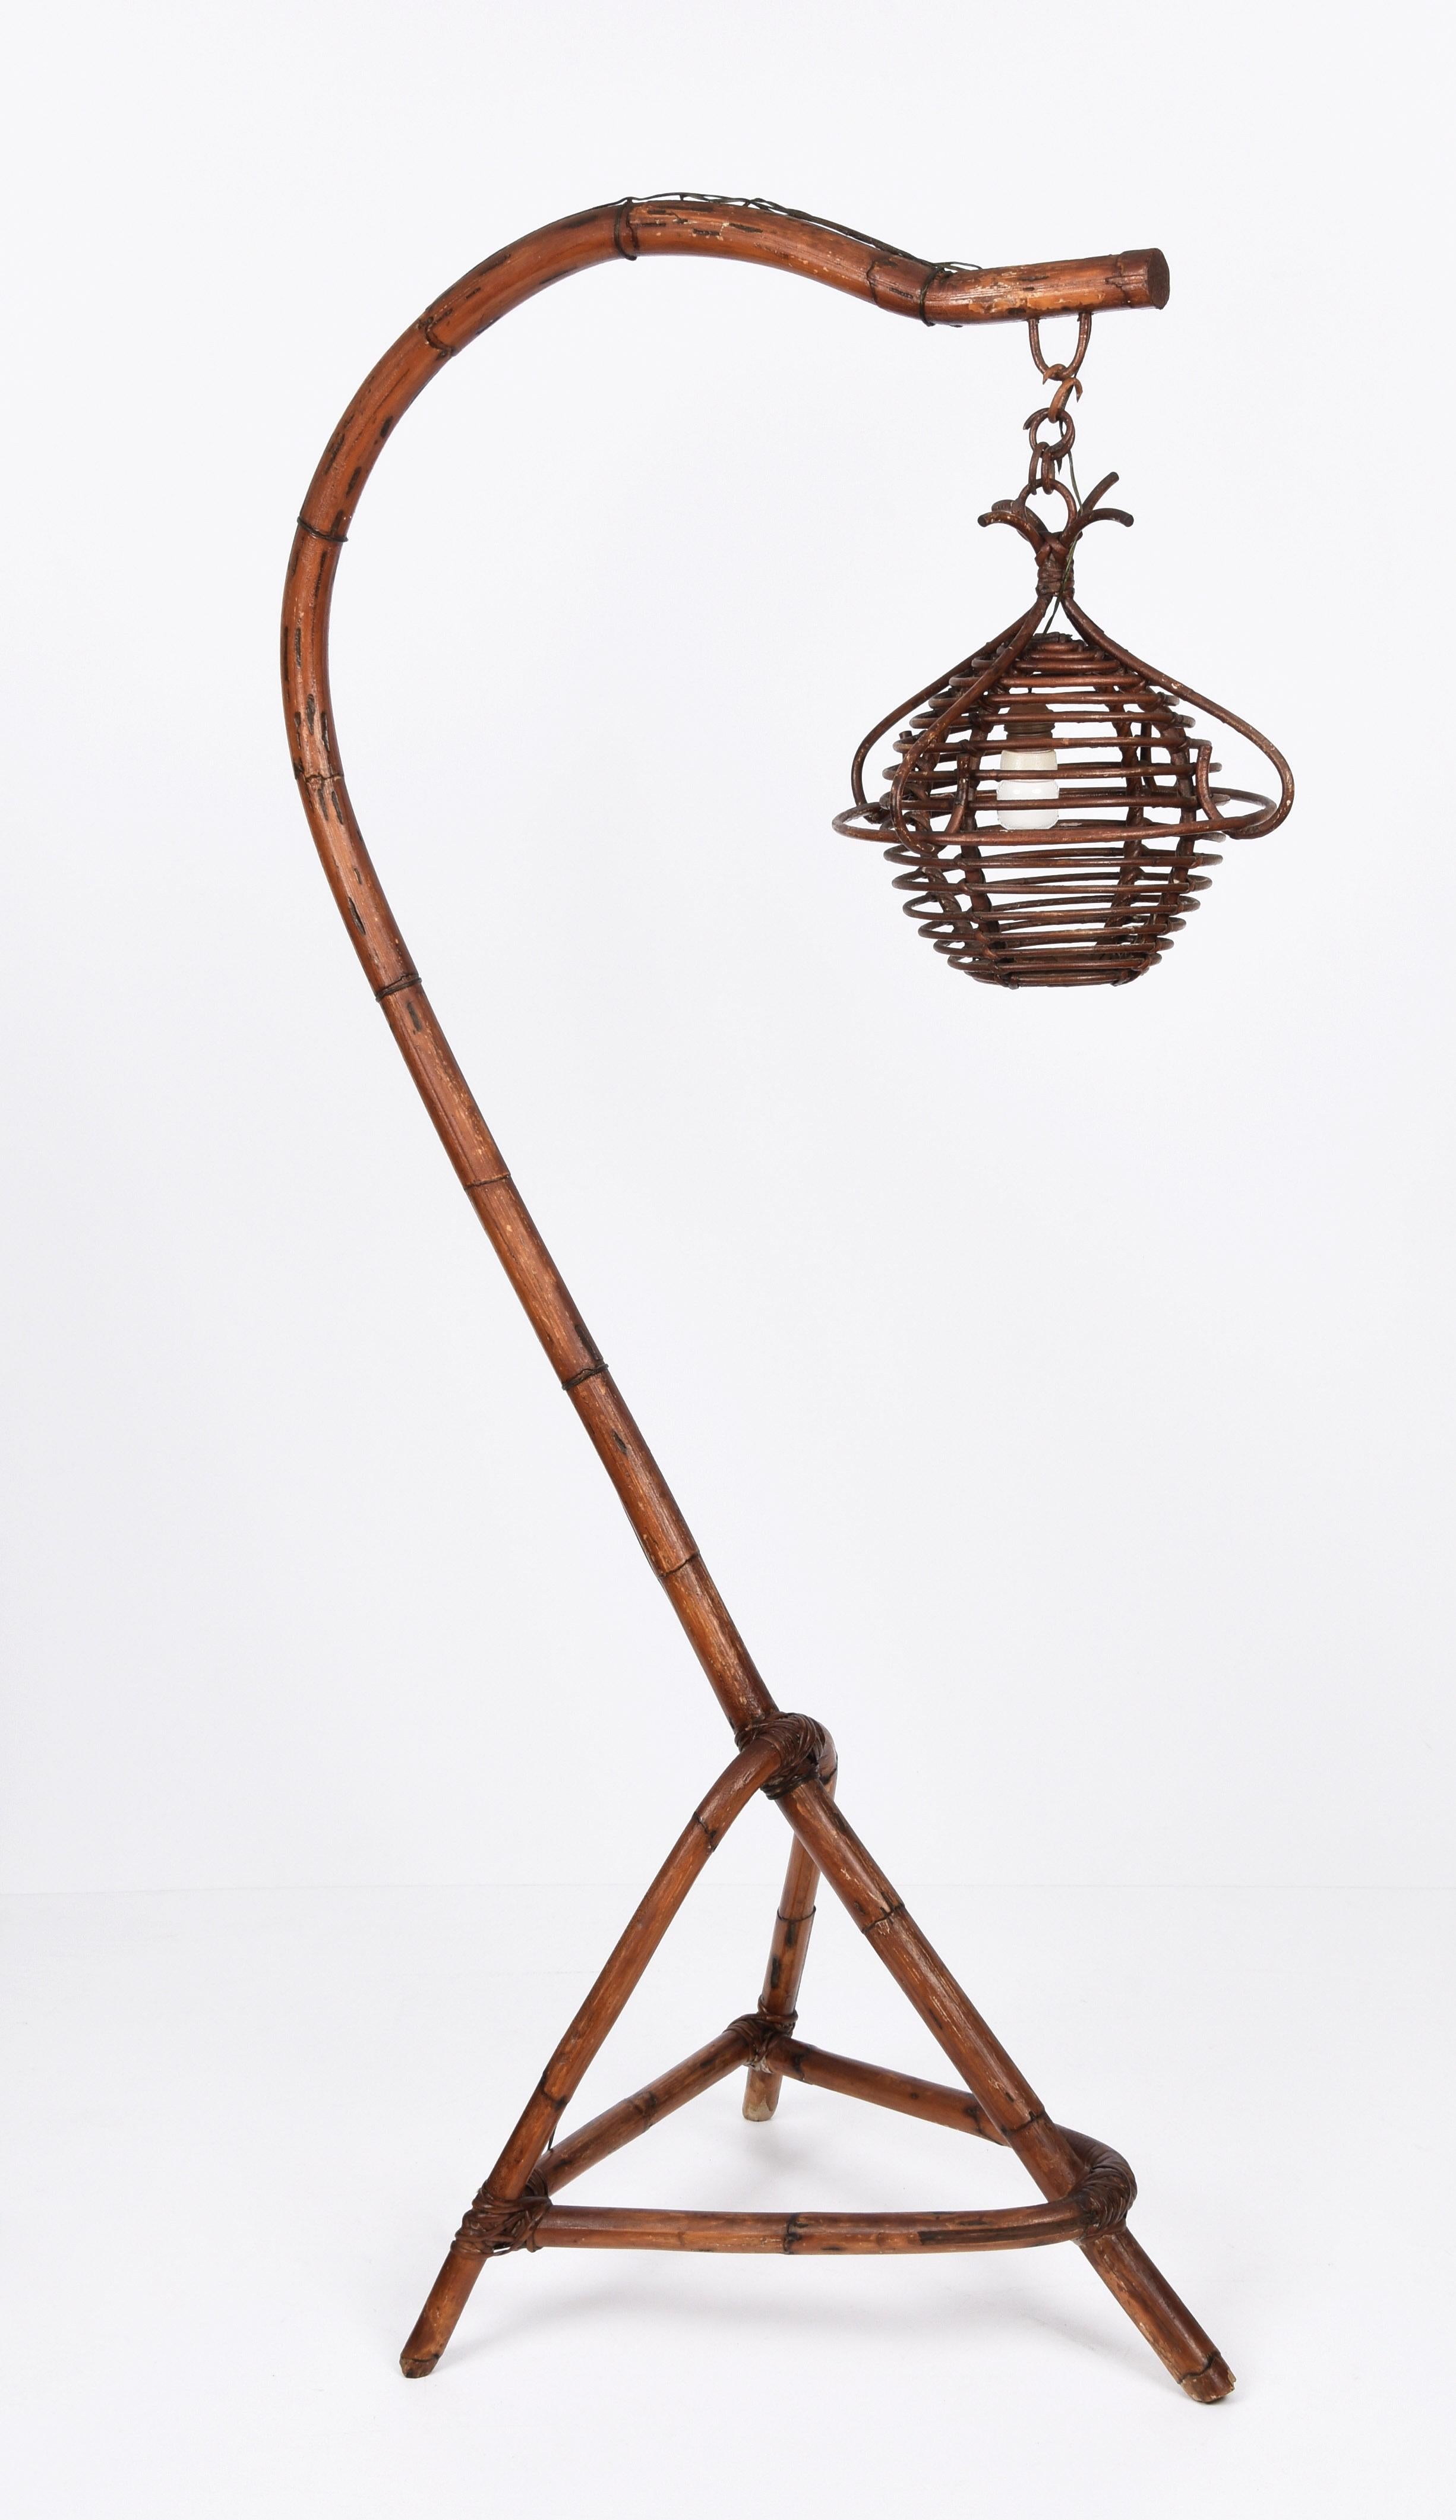 Amazing midcentury modern bamboo and rattan Floor Lamp. This fantastic item was produced in Italy during the1950s.

This piece is astonishing because of the fantastic three feet base and the arched structure. The rattan lampshade covering the